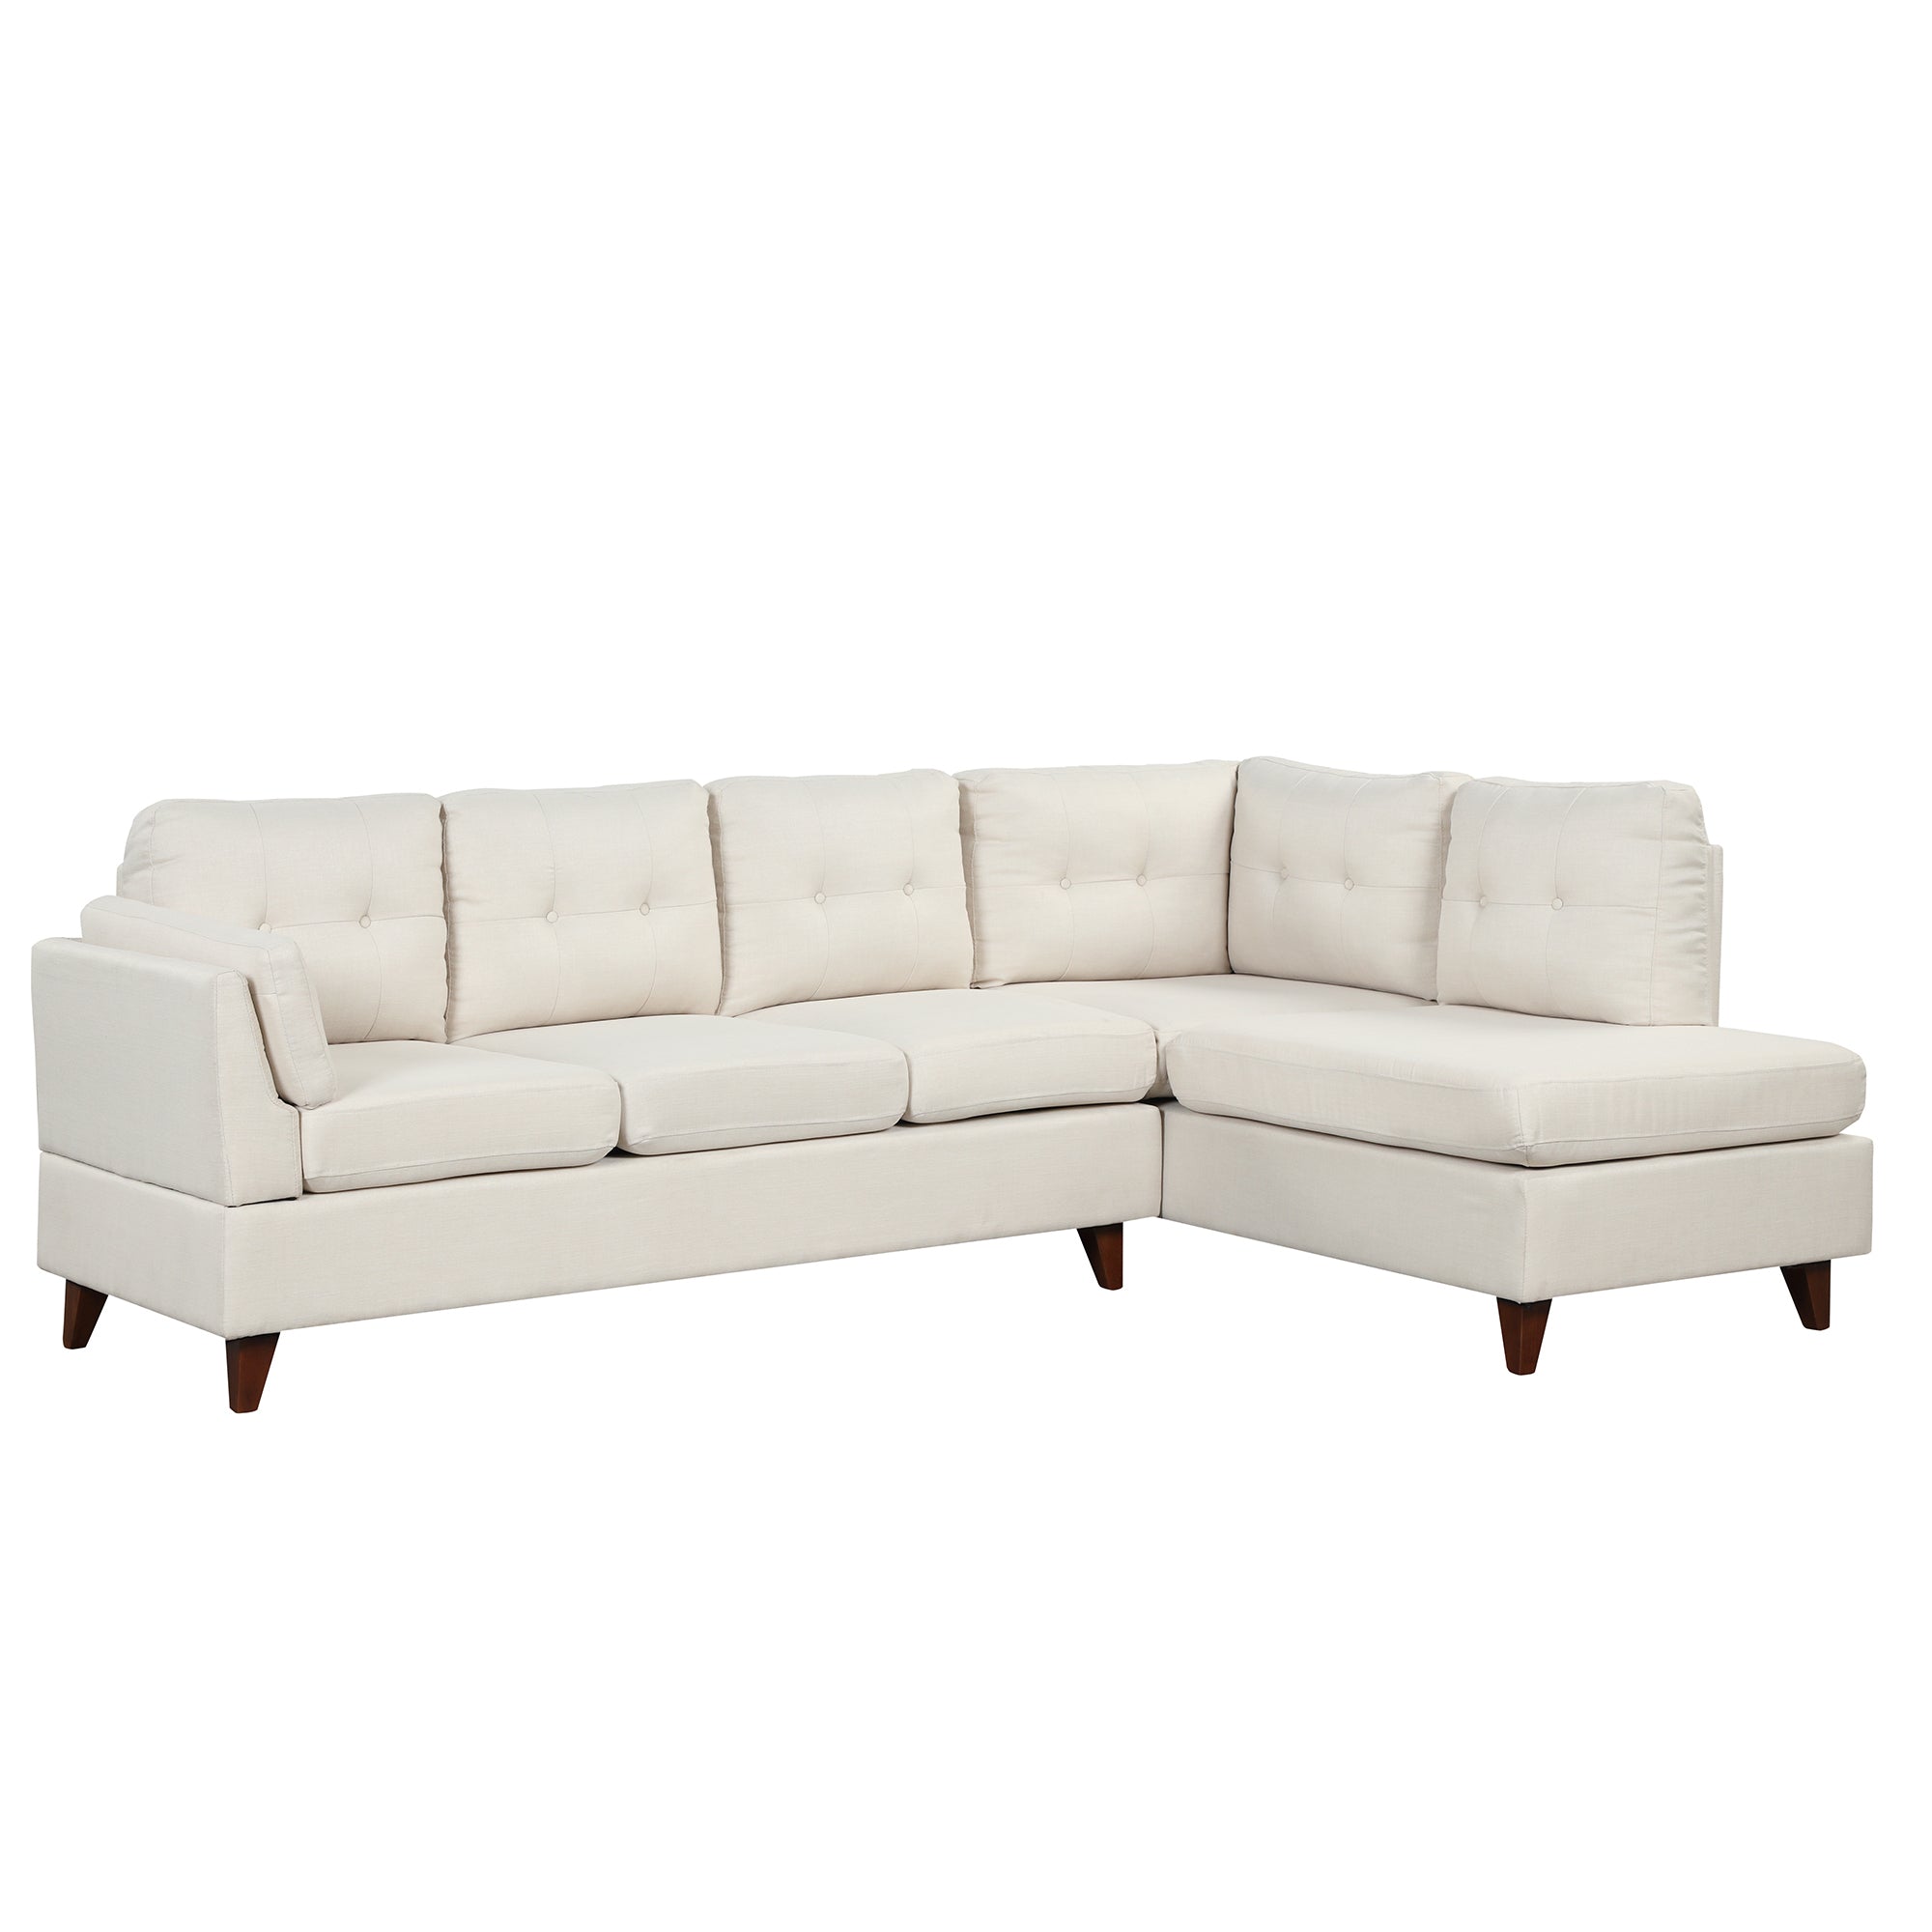 97.2" Modern Linen Fabric Sofa, L-Shape Couch with Chaise Lounge